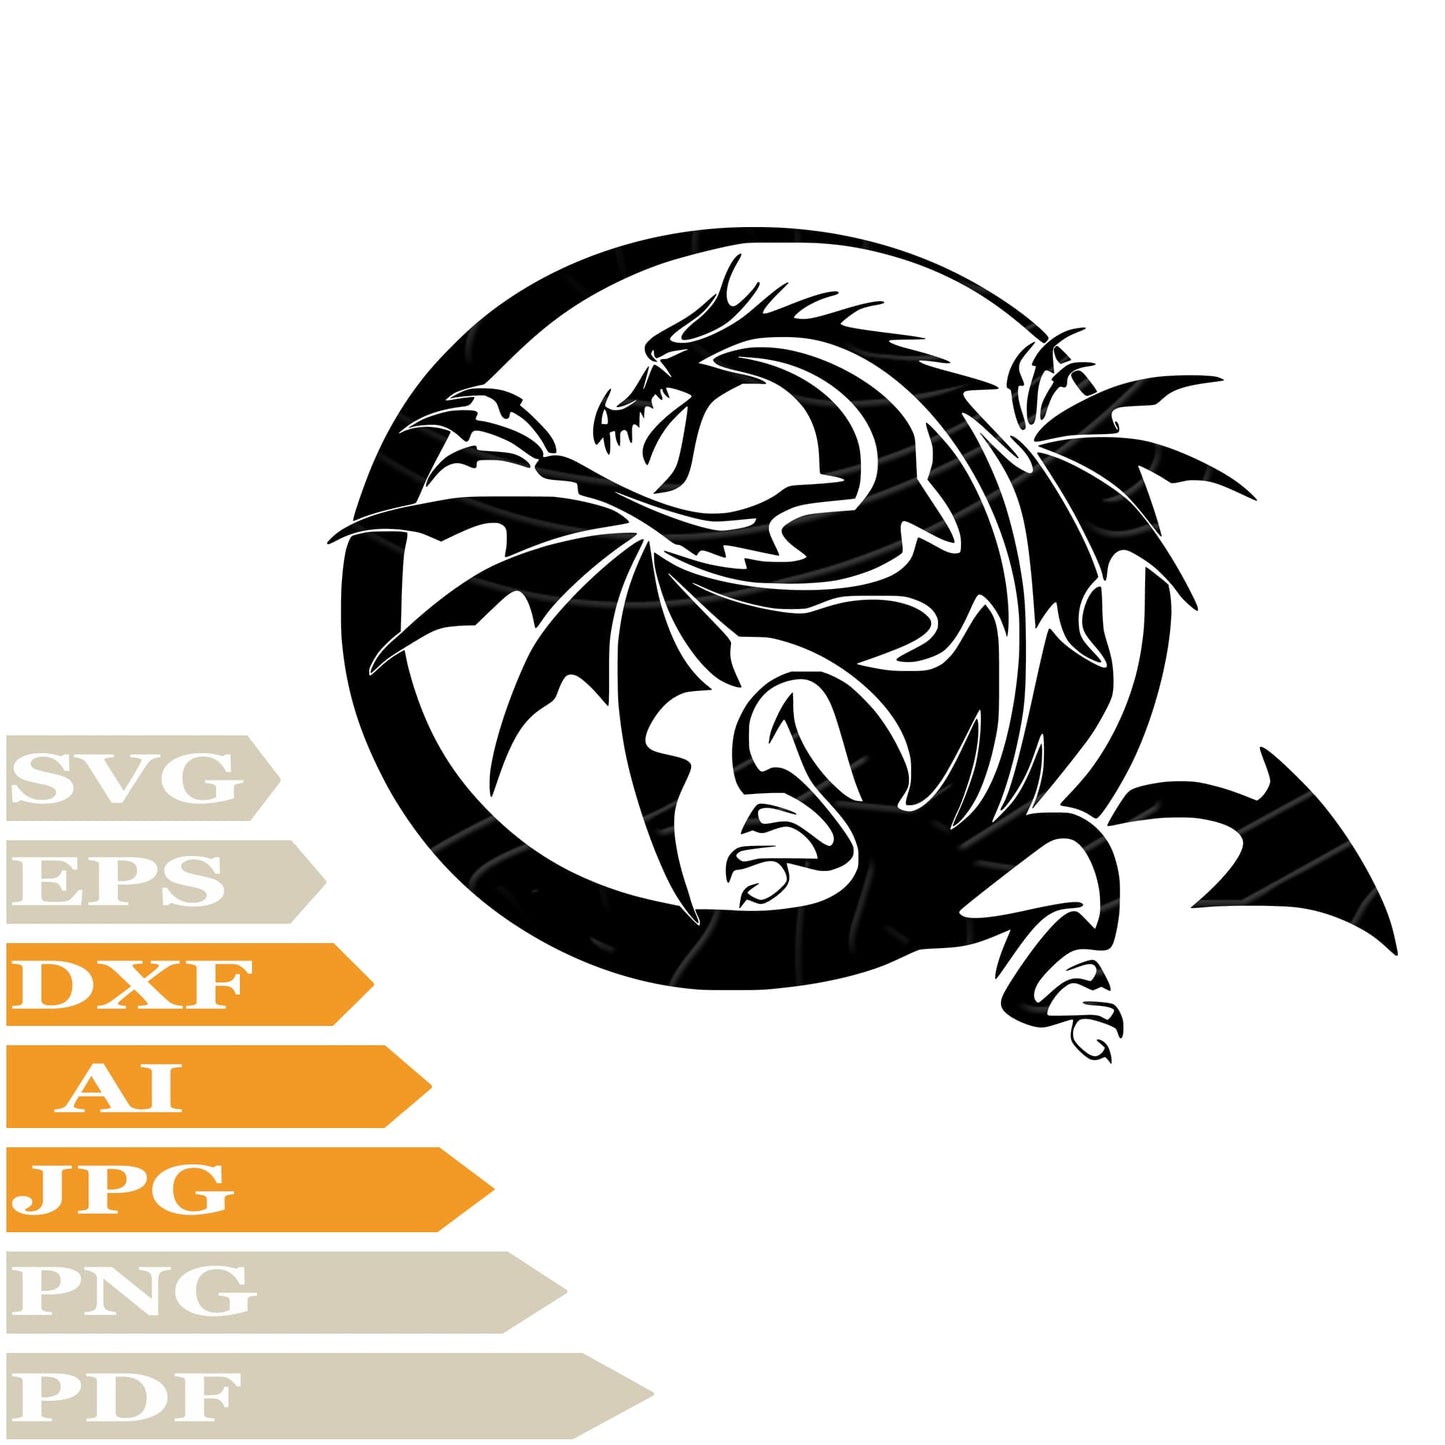 Dragon ﻿SVG, Wild Dragon SVG Design, Dragon With Wings Personalised SVG, Dragon PNG, Vector Graphics, Dragon For Cricut, Digital Instant Download, Clip Art, Cut File, For Shirts, Silhouette